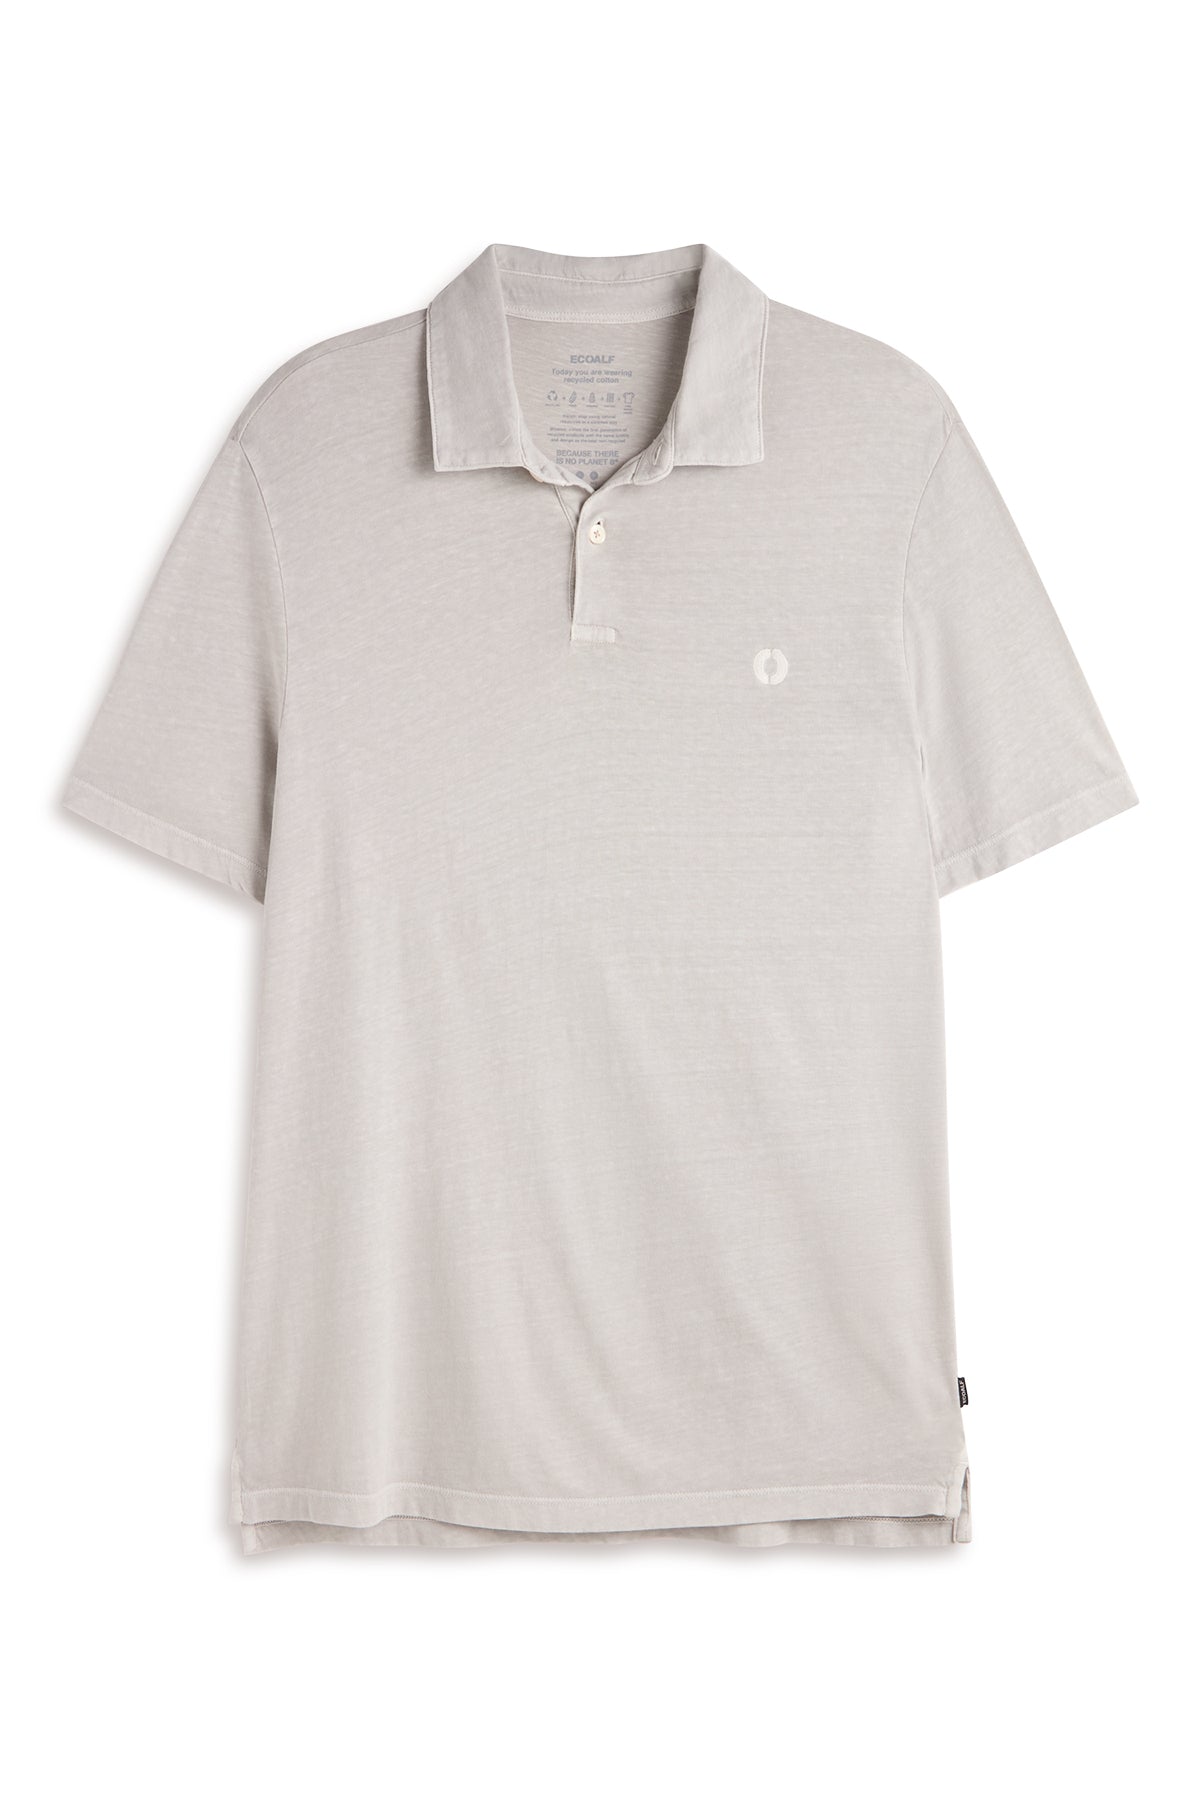 BEIGE THEO JERSEY POLO SHIRT